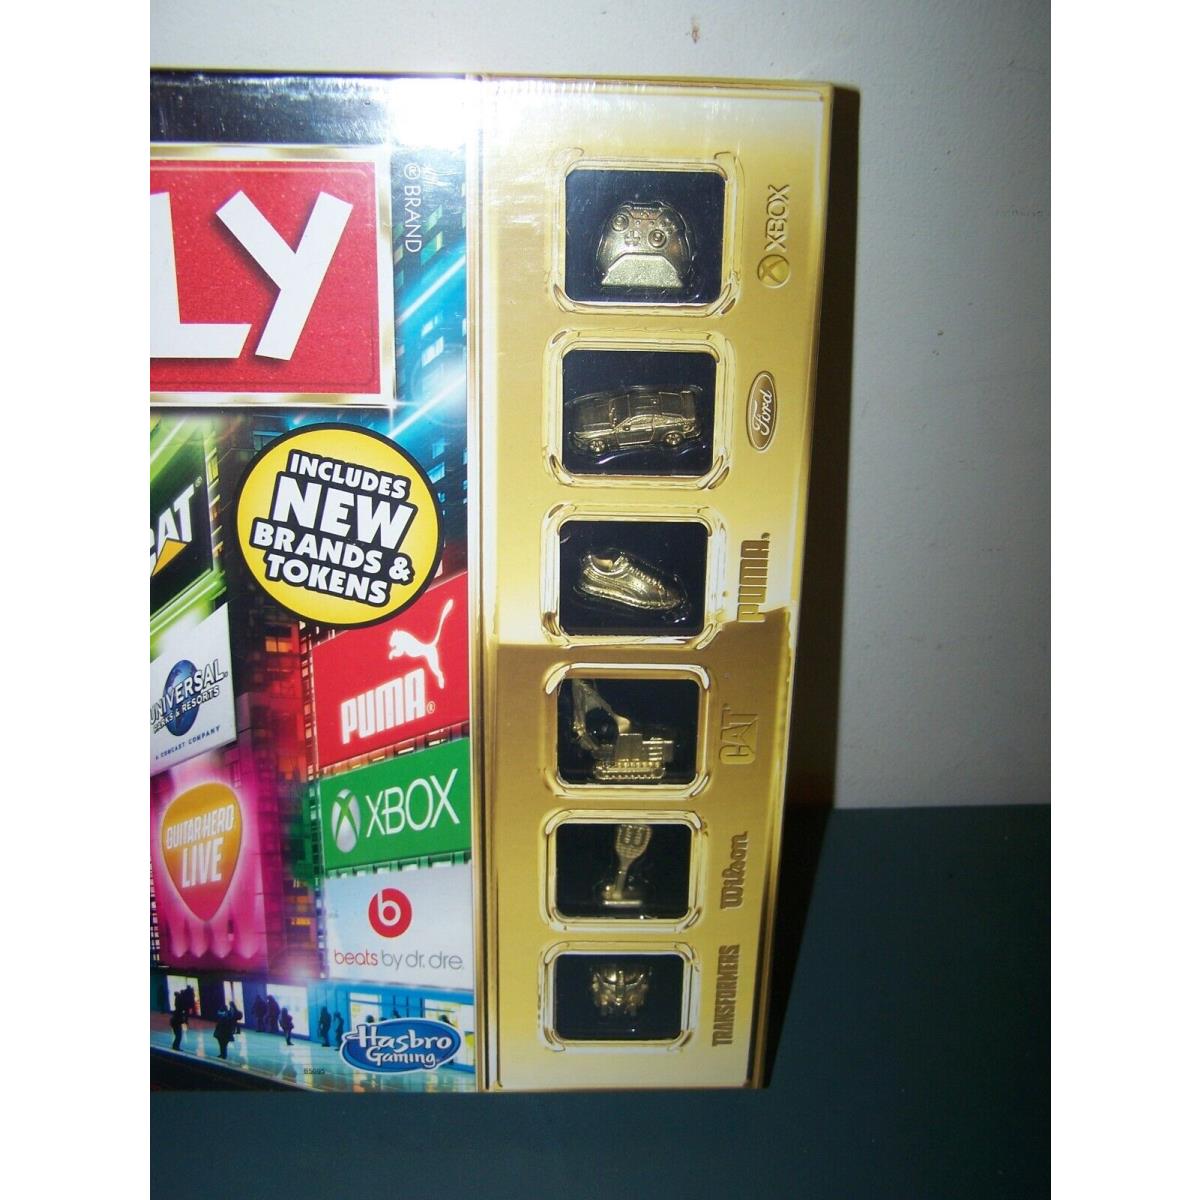 Hasbro Monopoly Empire Gold Edition Own The Top Brands 2015